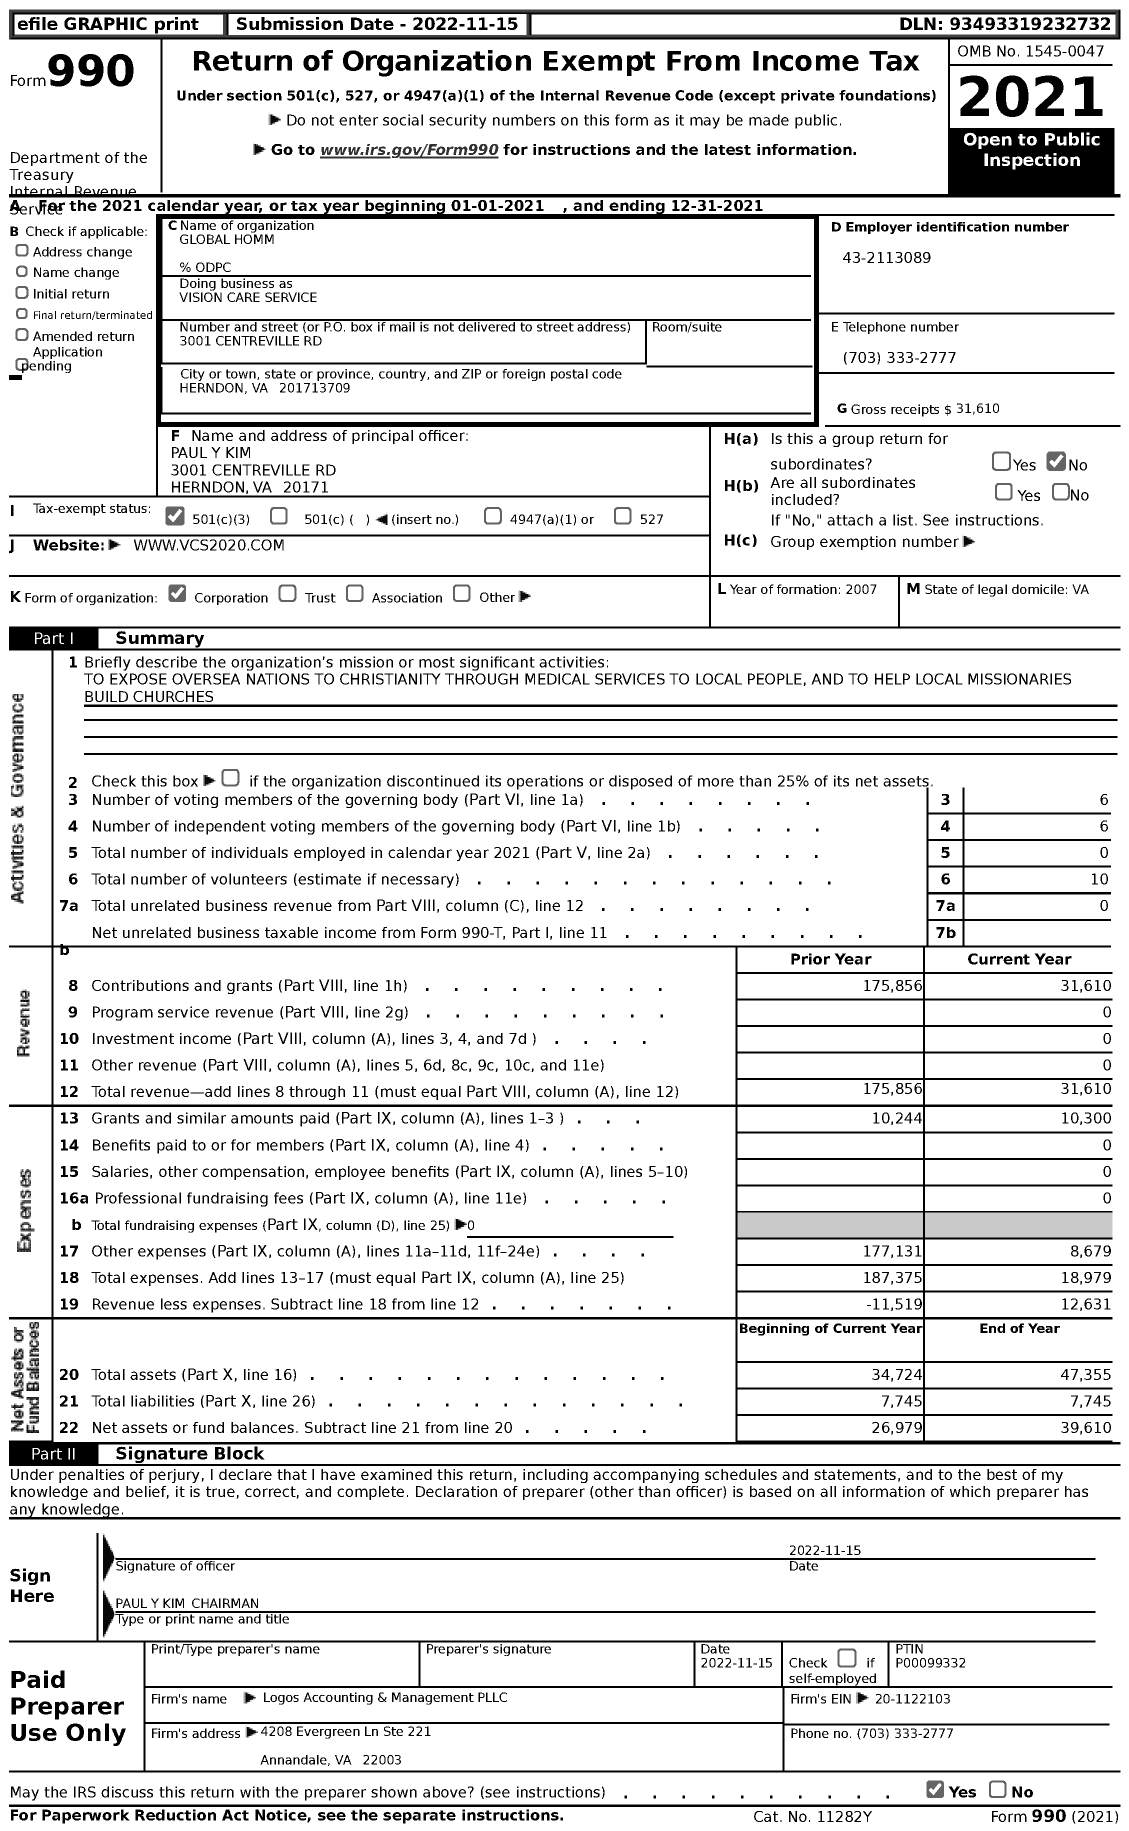 Image of first page of 2021 Form 990 for Global Homm Vision Care Service